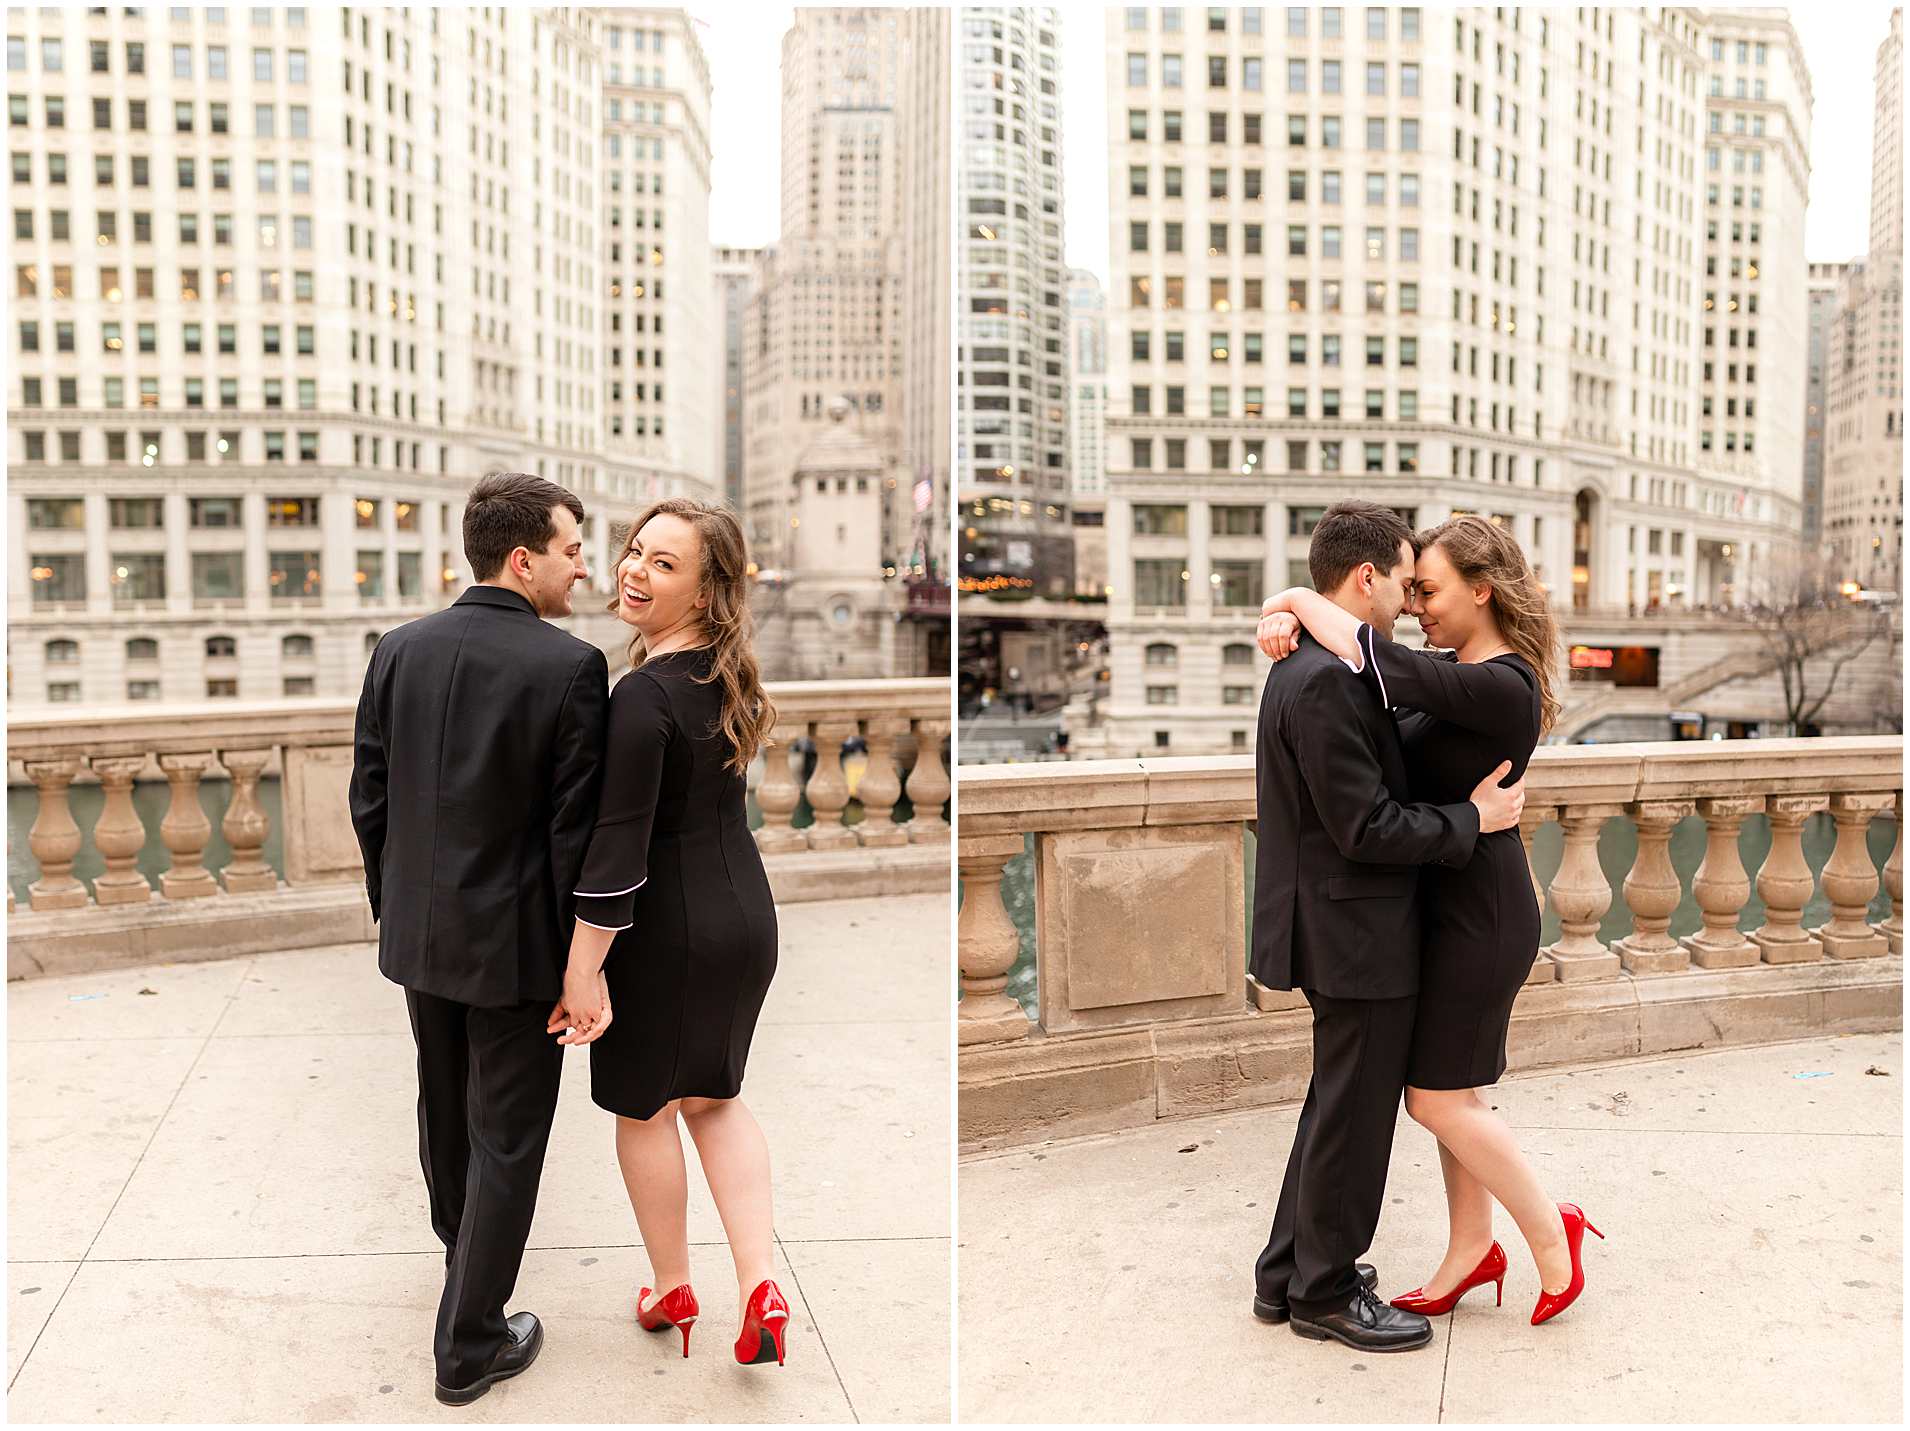 The Wrigley Building Engagement Photos, Formal Engagement Session Outfits in Downtown Chicago